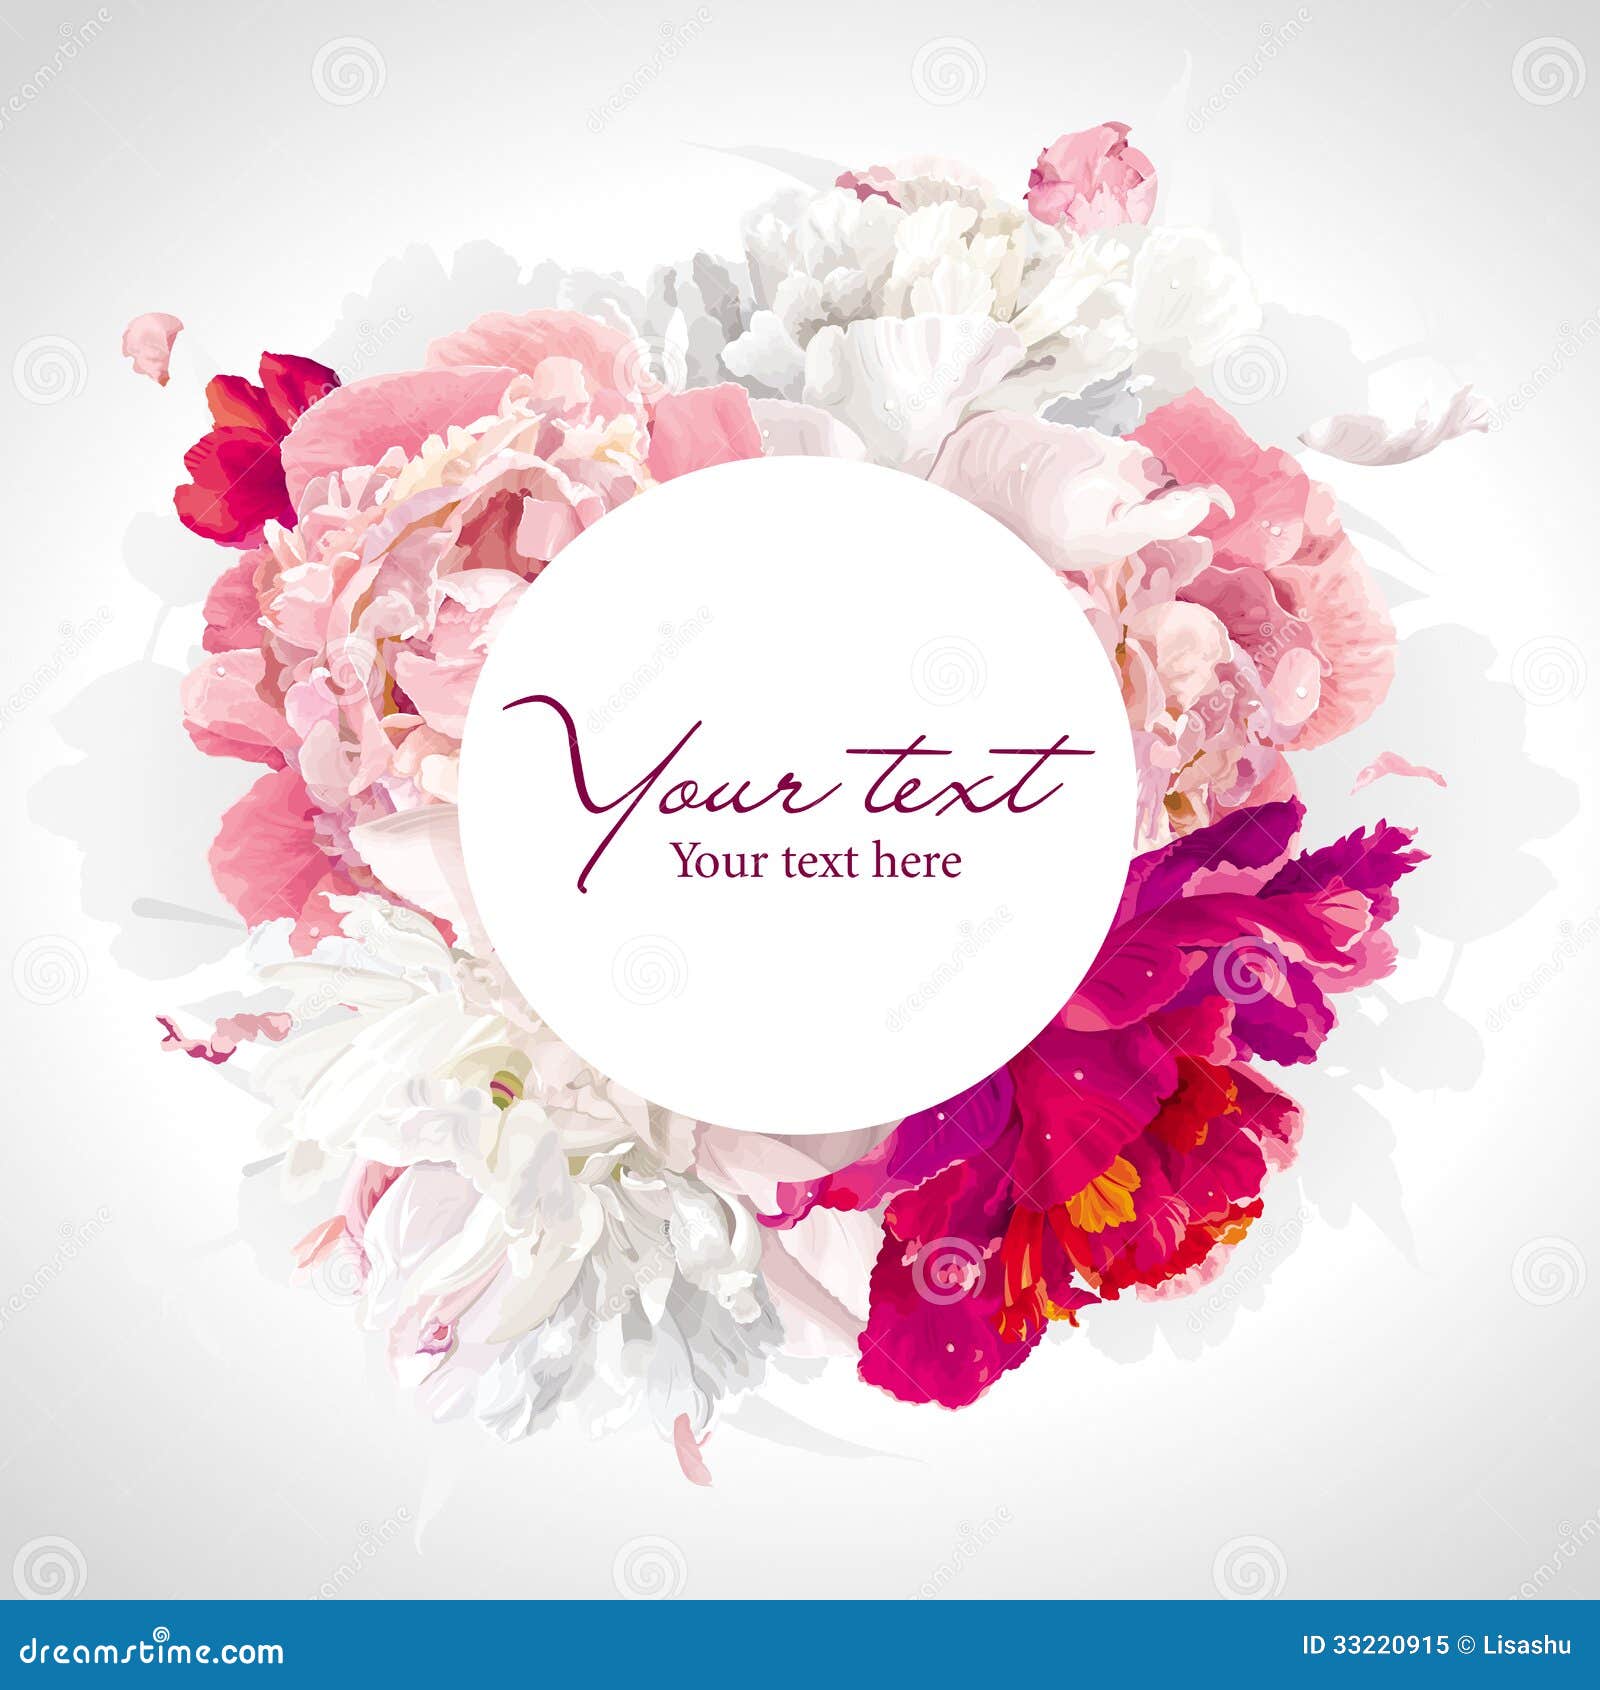 backgrounds roses tumblr Background Pink, White Free Red Stock And Royalty Peony